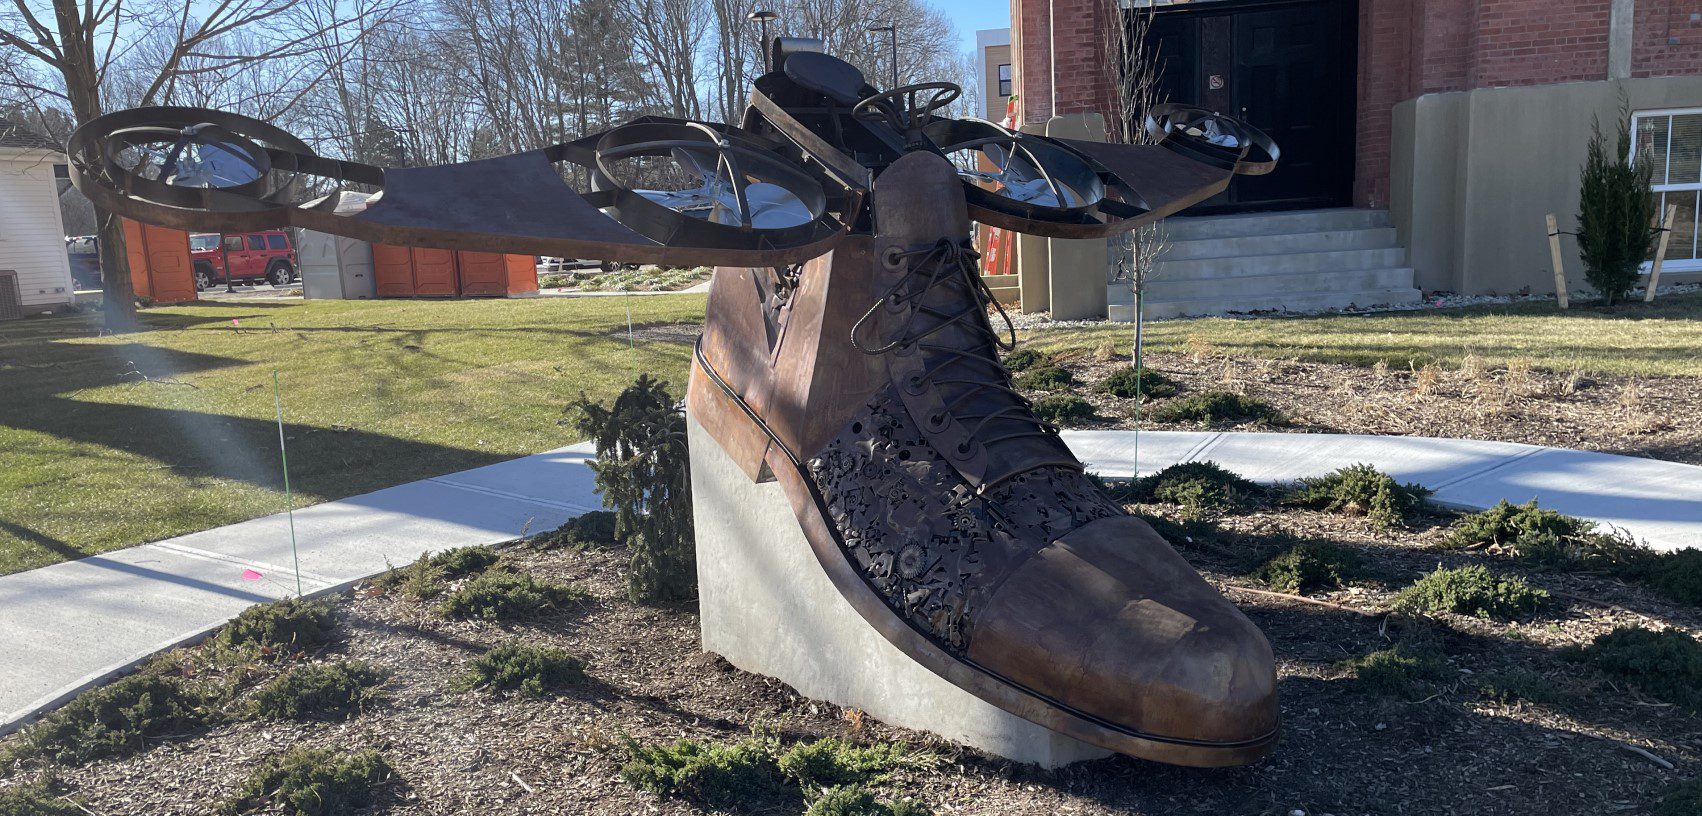 Featured image for “The McElwain Flying Shoe”